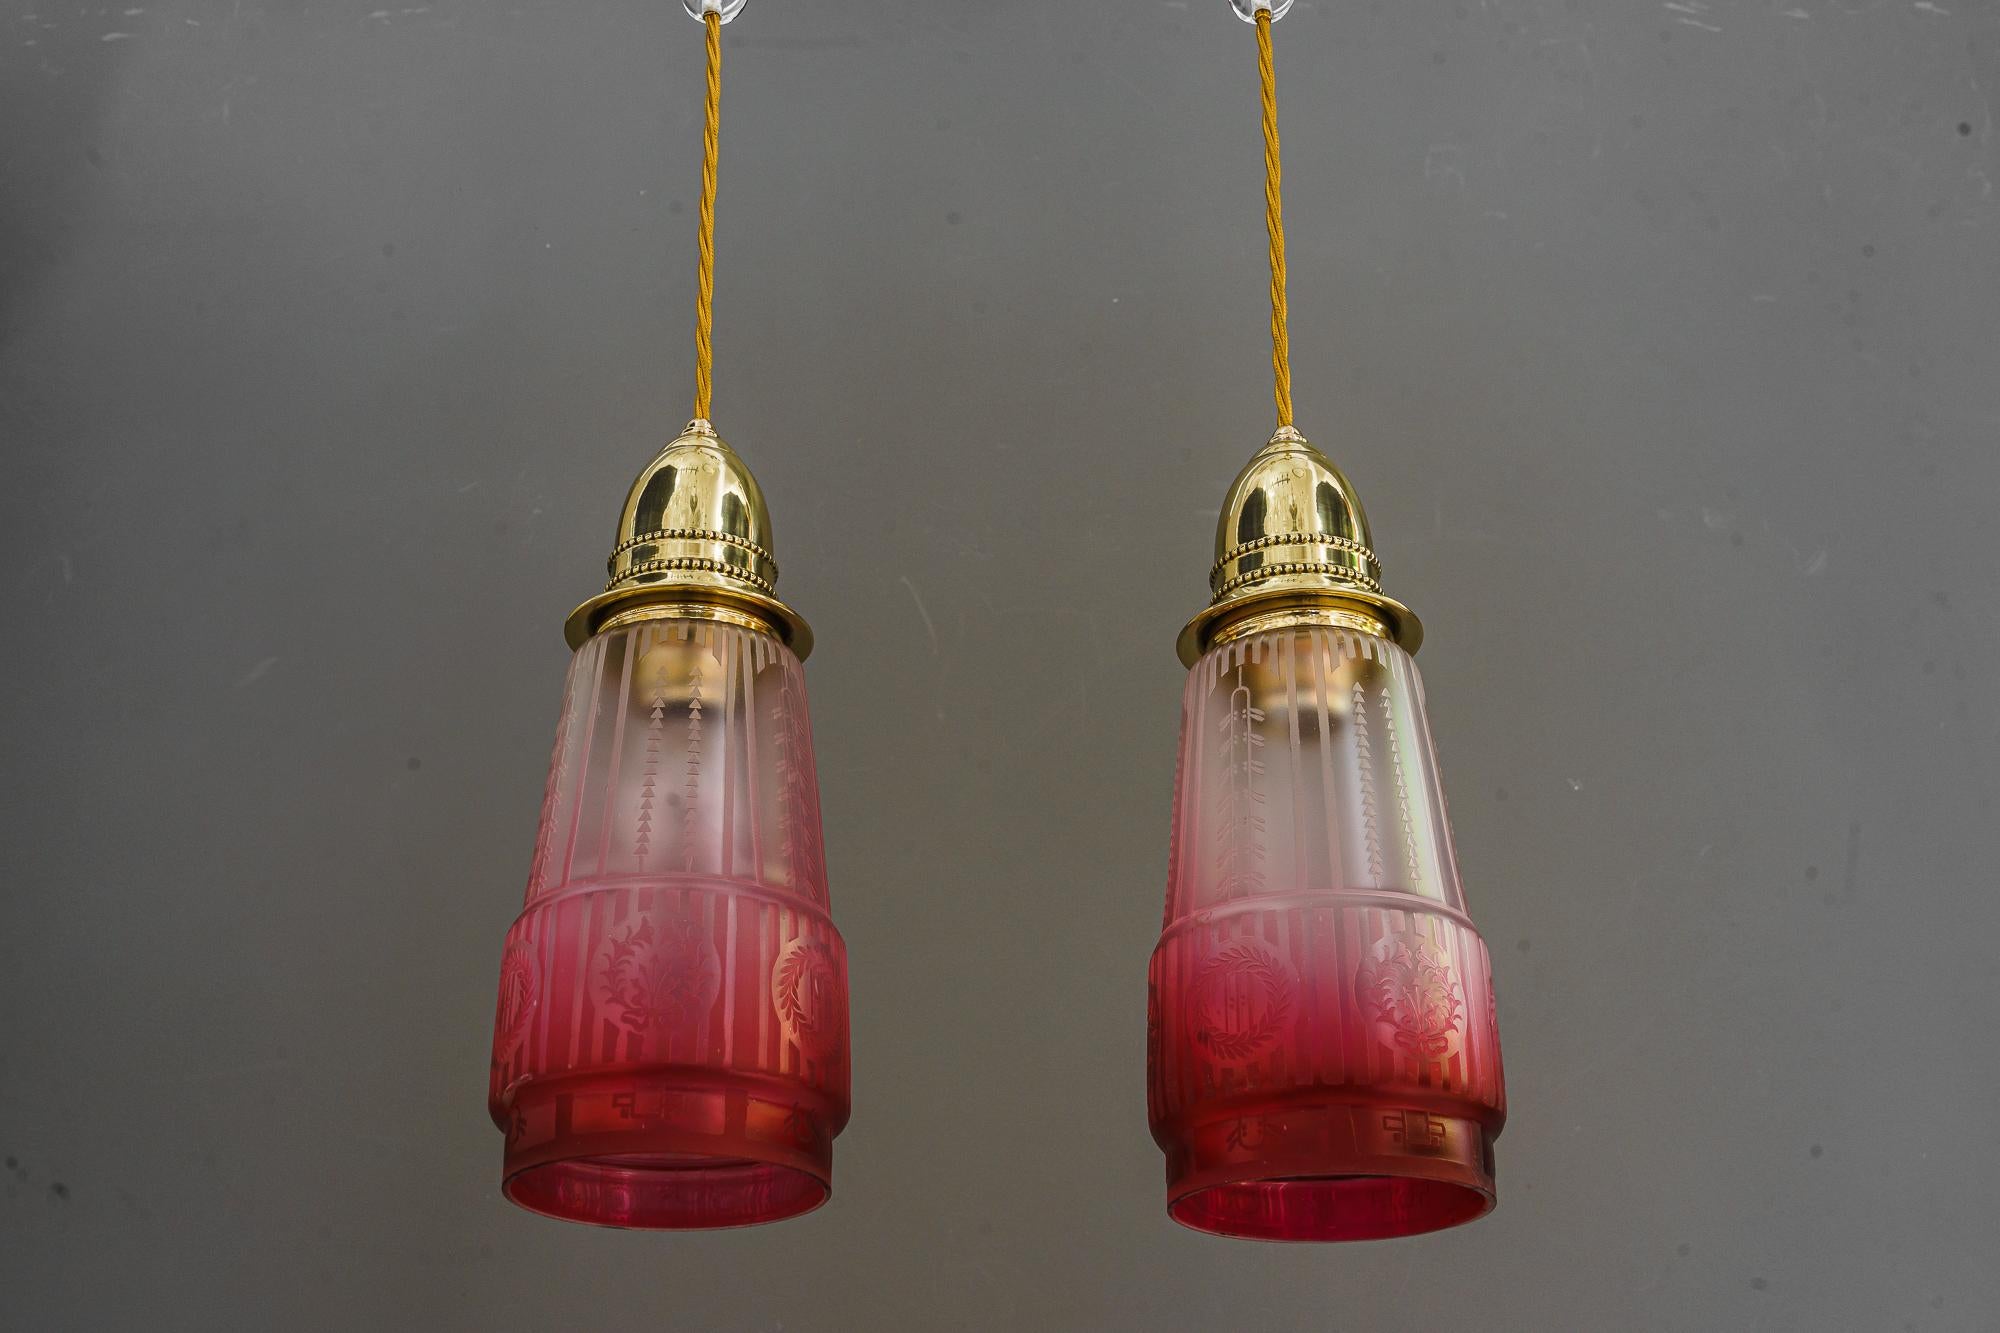 2x Art Deco Hanging Lamp with Original Old Glass Shades Vienna Around, 1920s For Sale 3